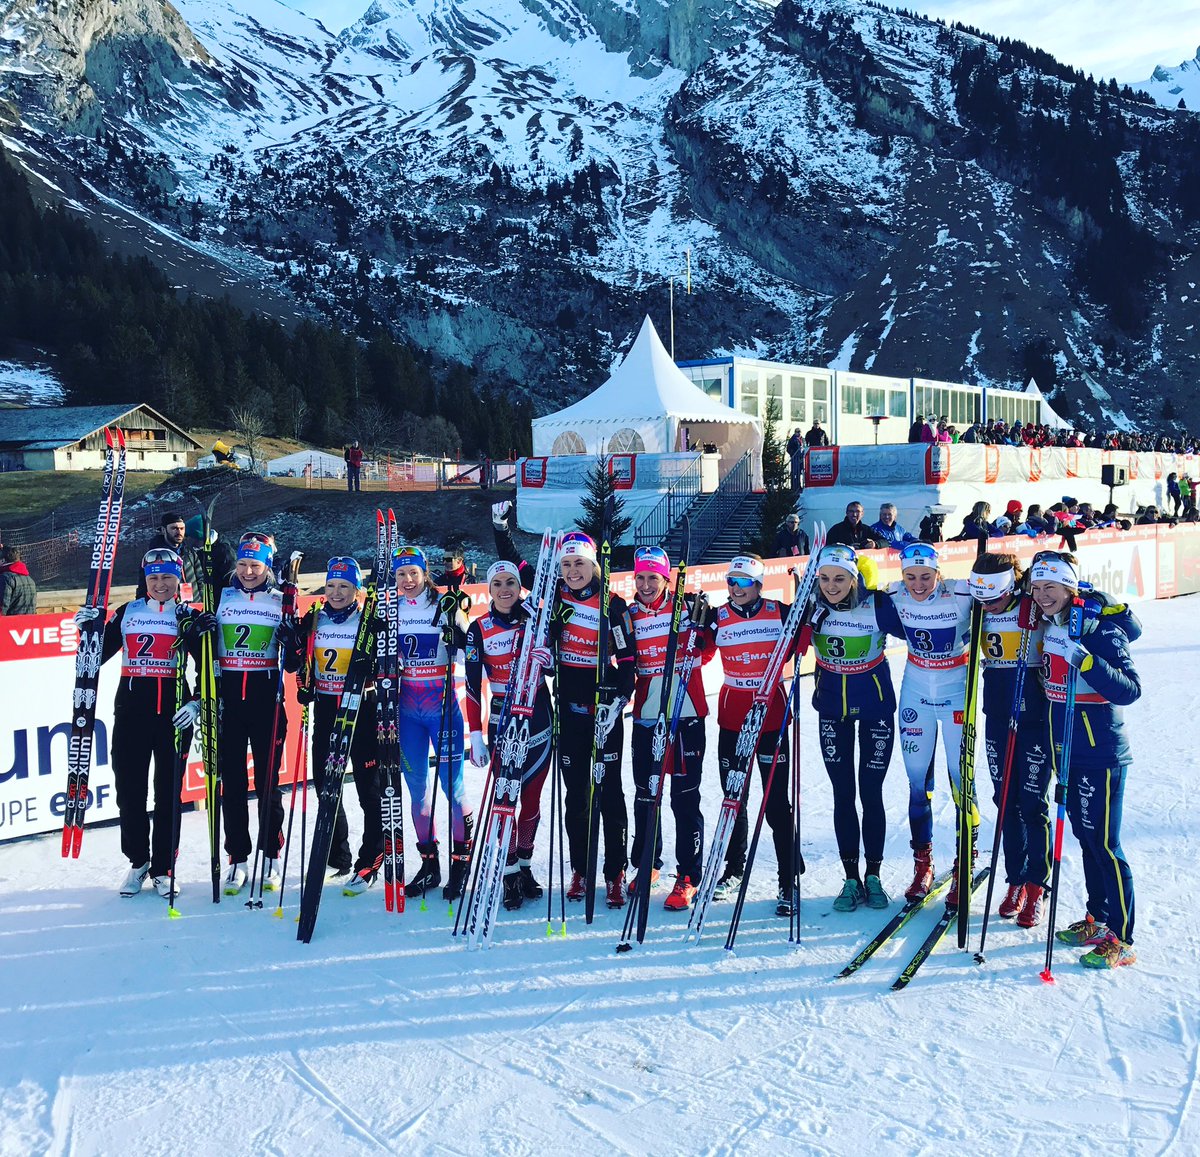 The women's 4 x 4 k mixed relay podium on Sunday in La Clusaz, France. Norway (c) took the win ahead of team Finland in second (l) and Sweden in third. (Photo: FIC Cross-Country/Twitter)